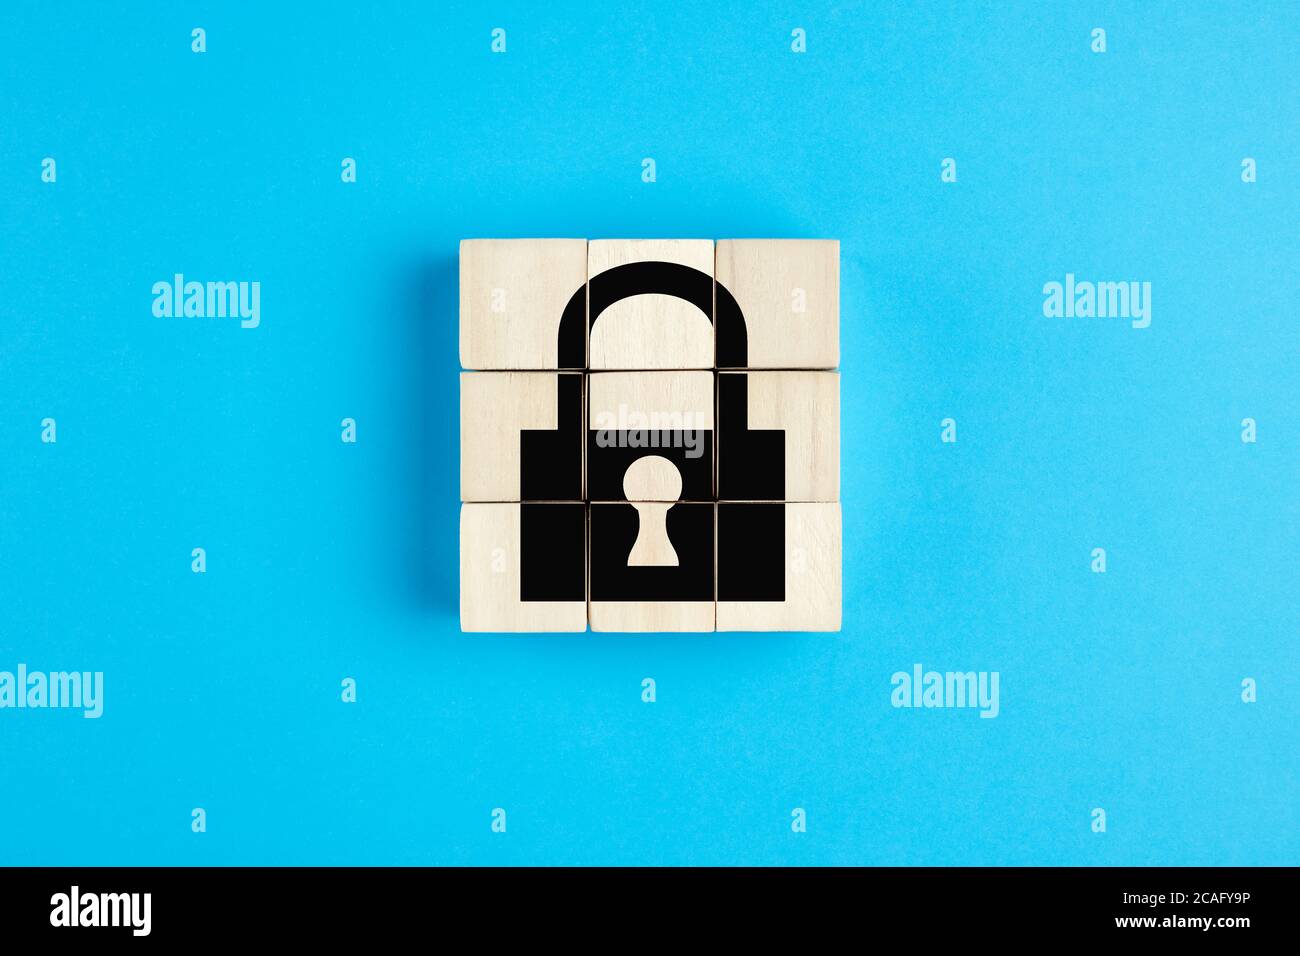 Lock icon on wooden cubes on blue background. Isolation, quarantine or data security concept. Stock Photo